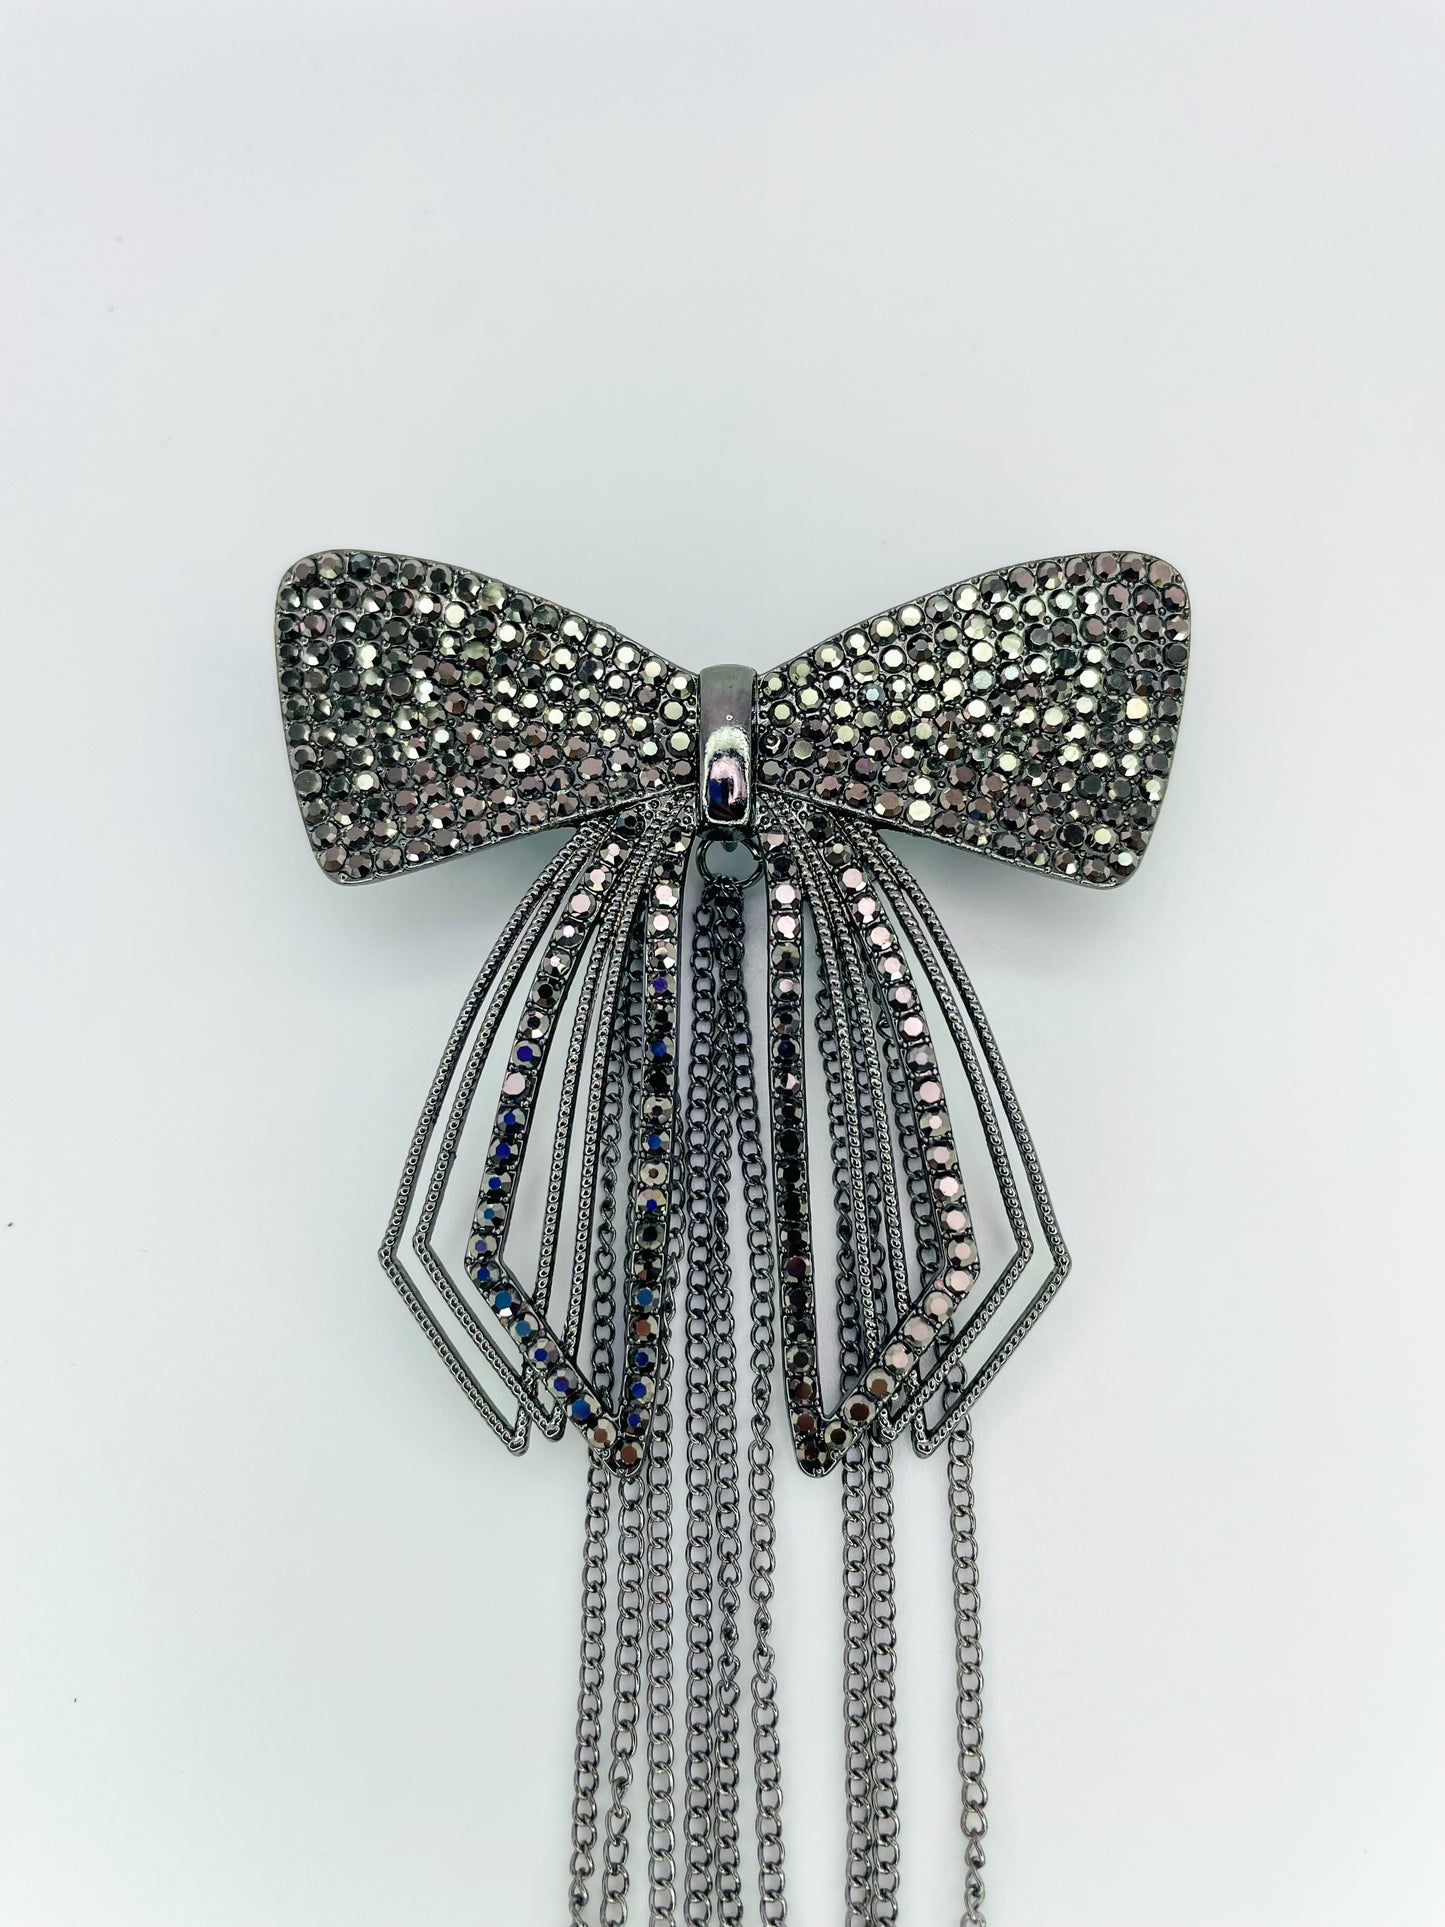 Black Bow Brochette with Dangling Black Chain; Hair Pin